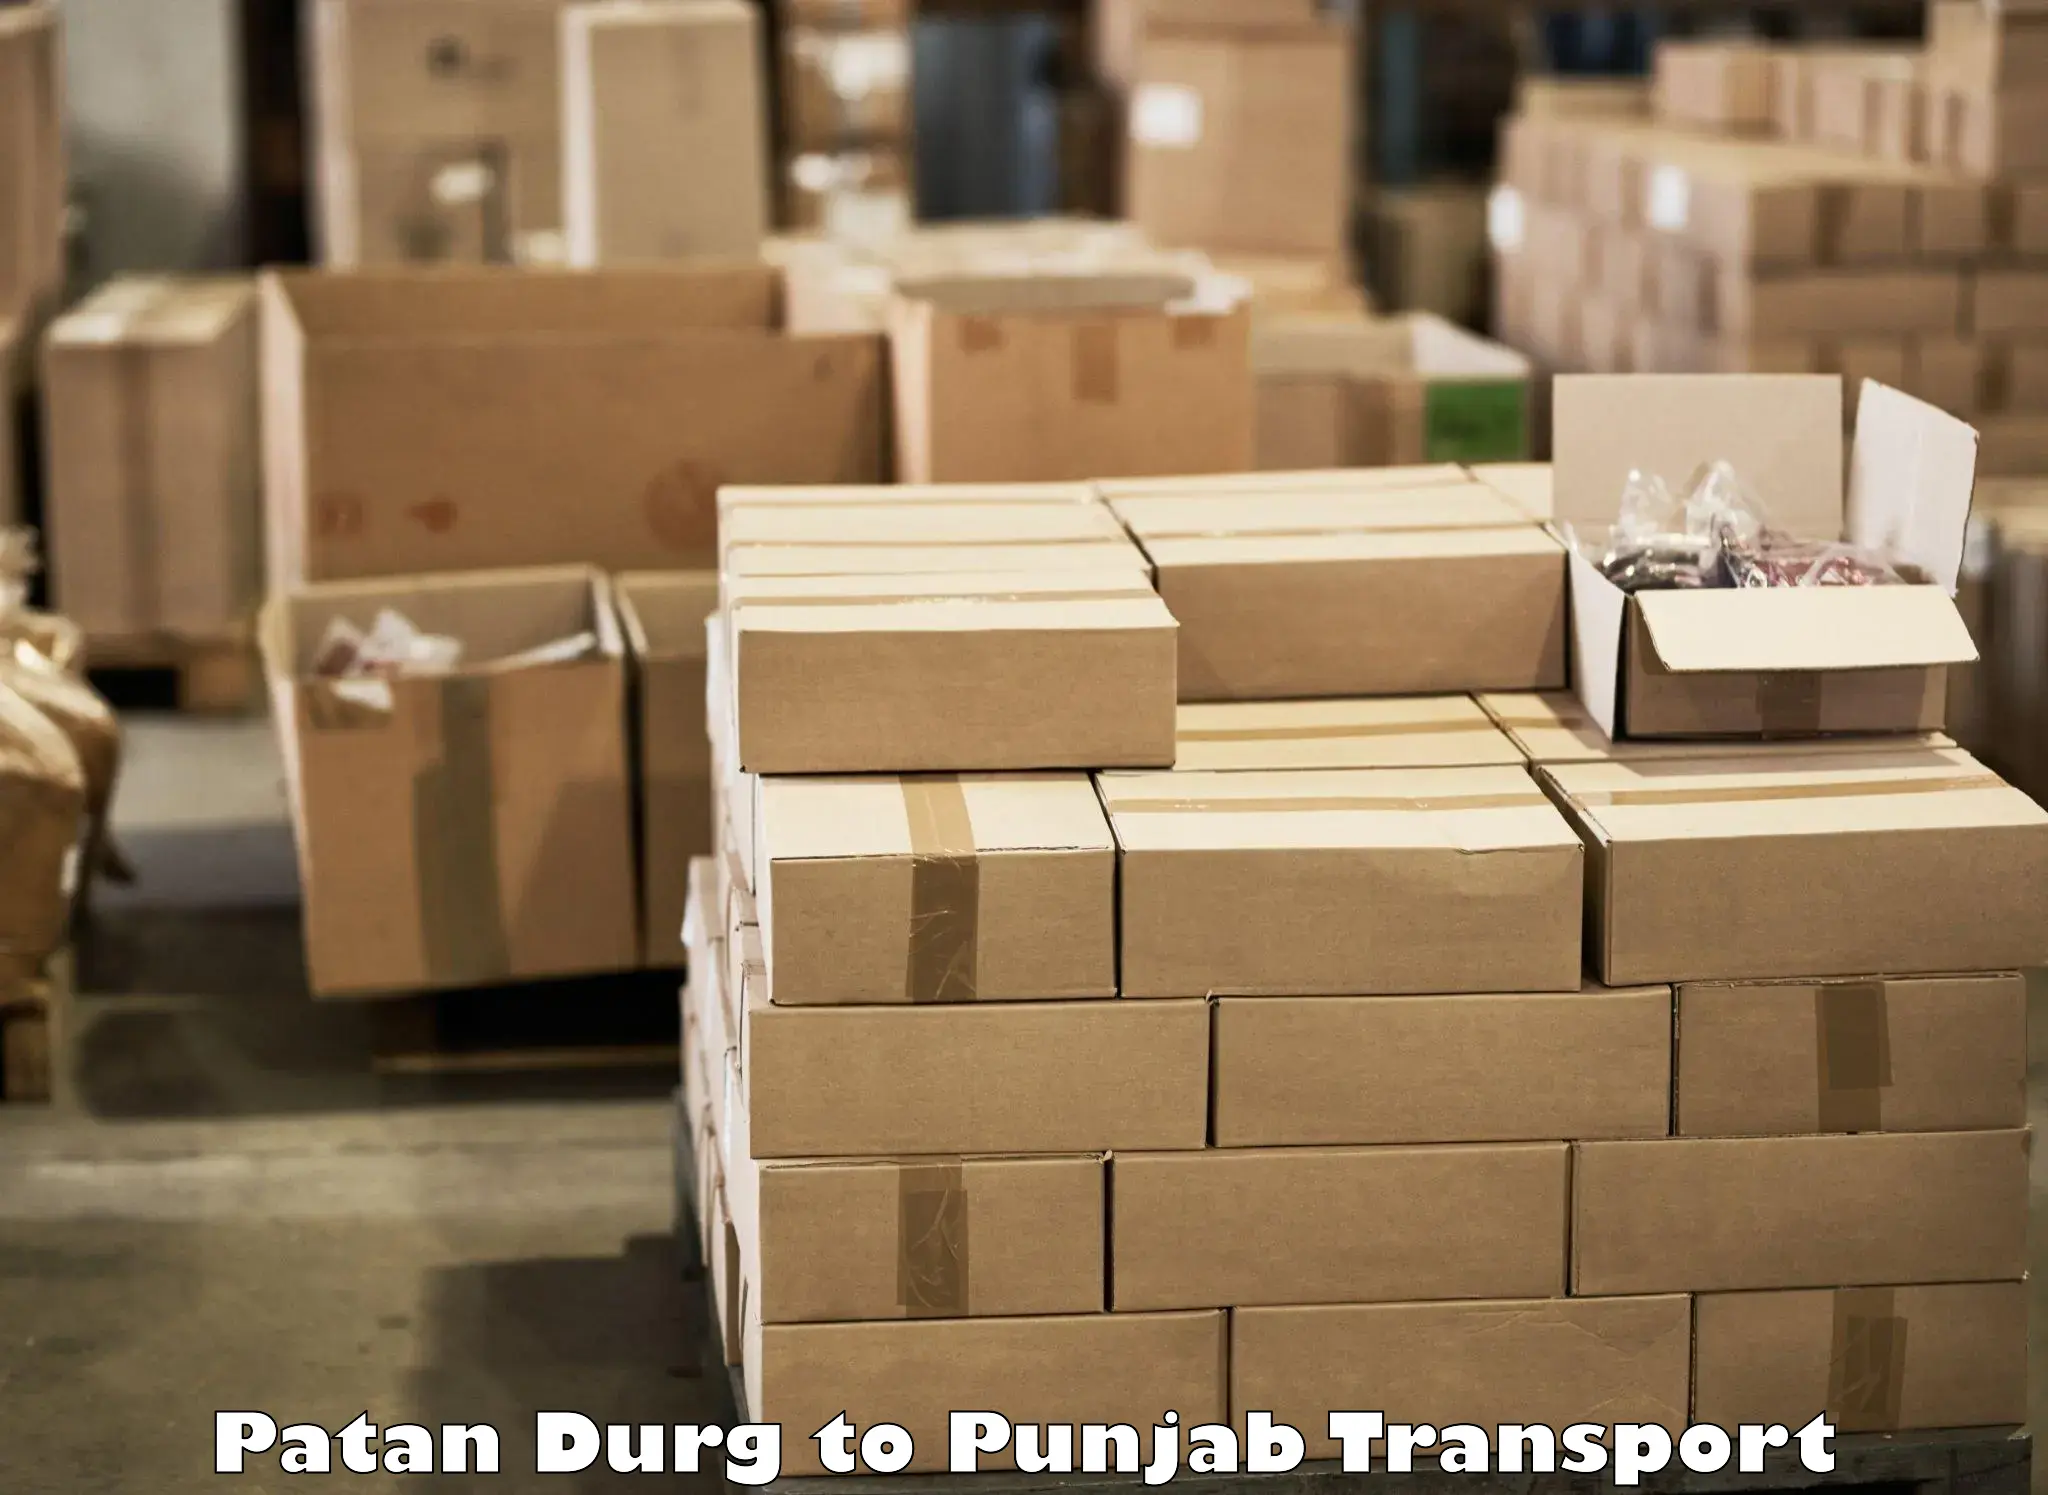 Container transport service Patan Durg to Sultanpur Lodhi